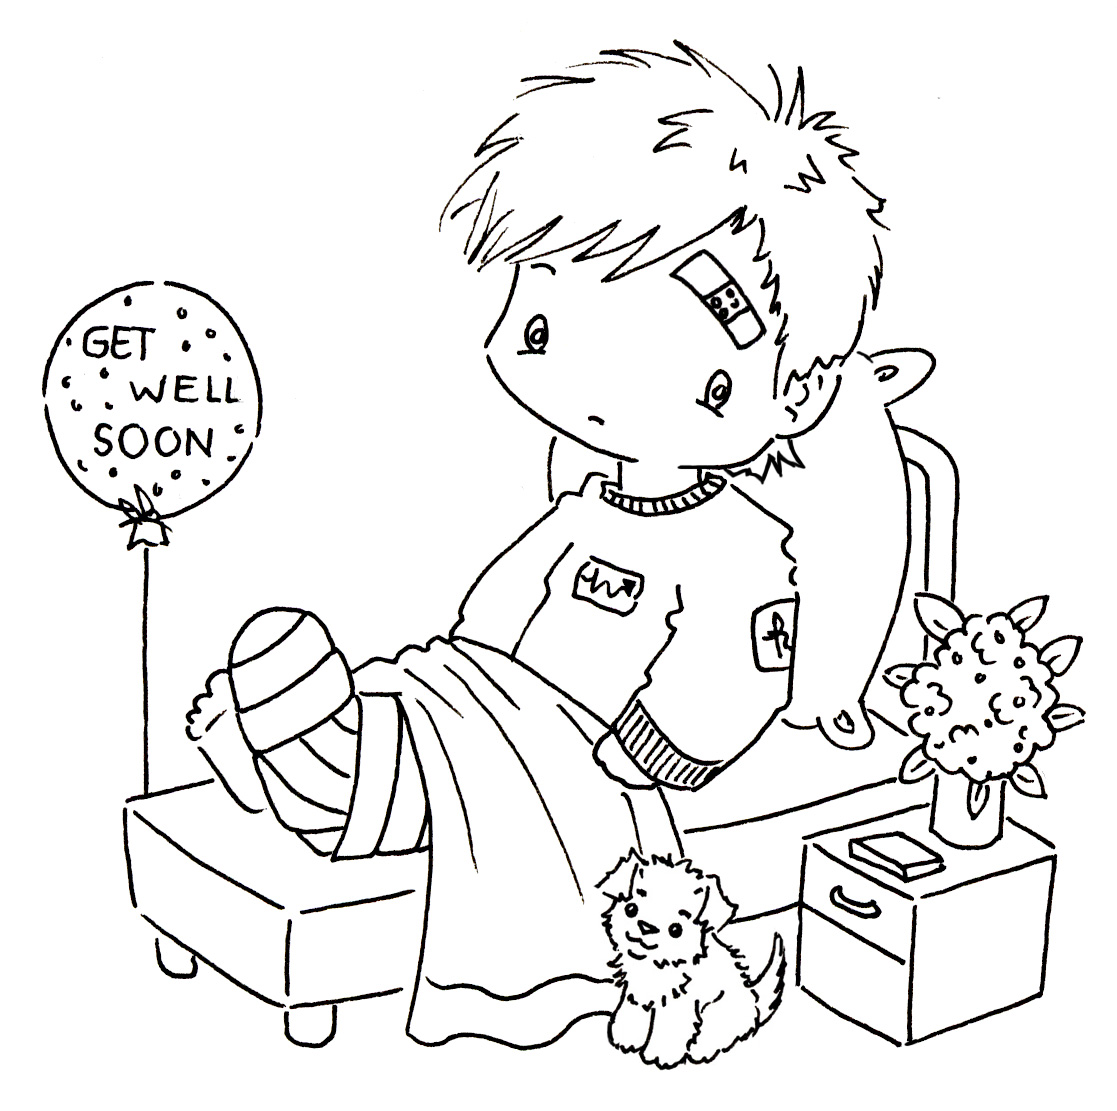 hallmark coloring pages get well - photo #26